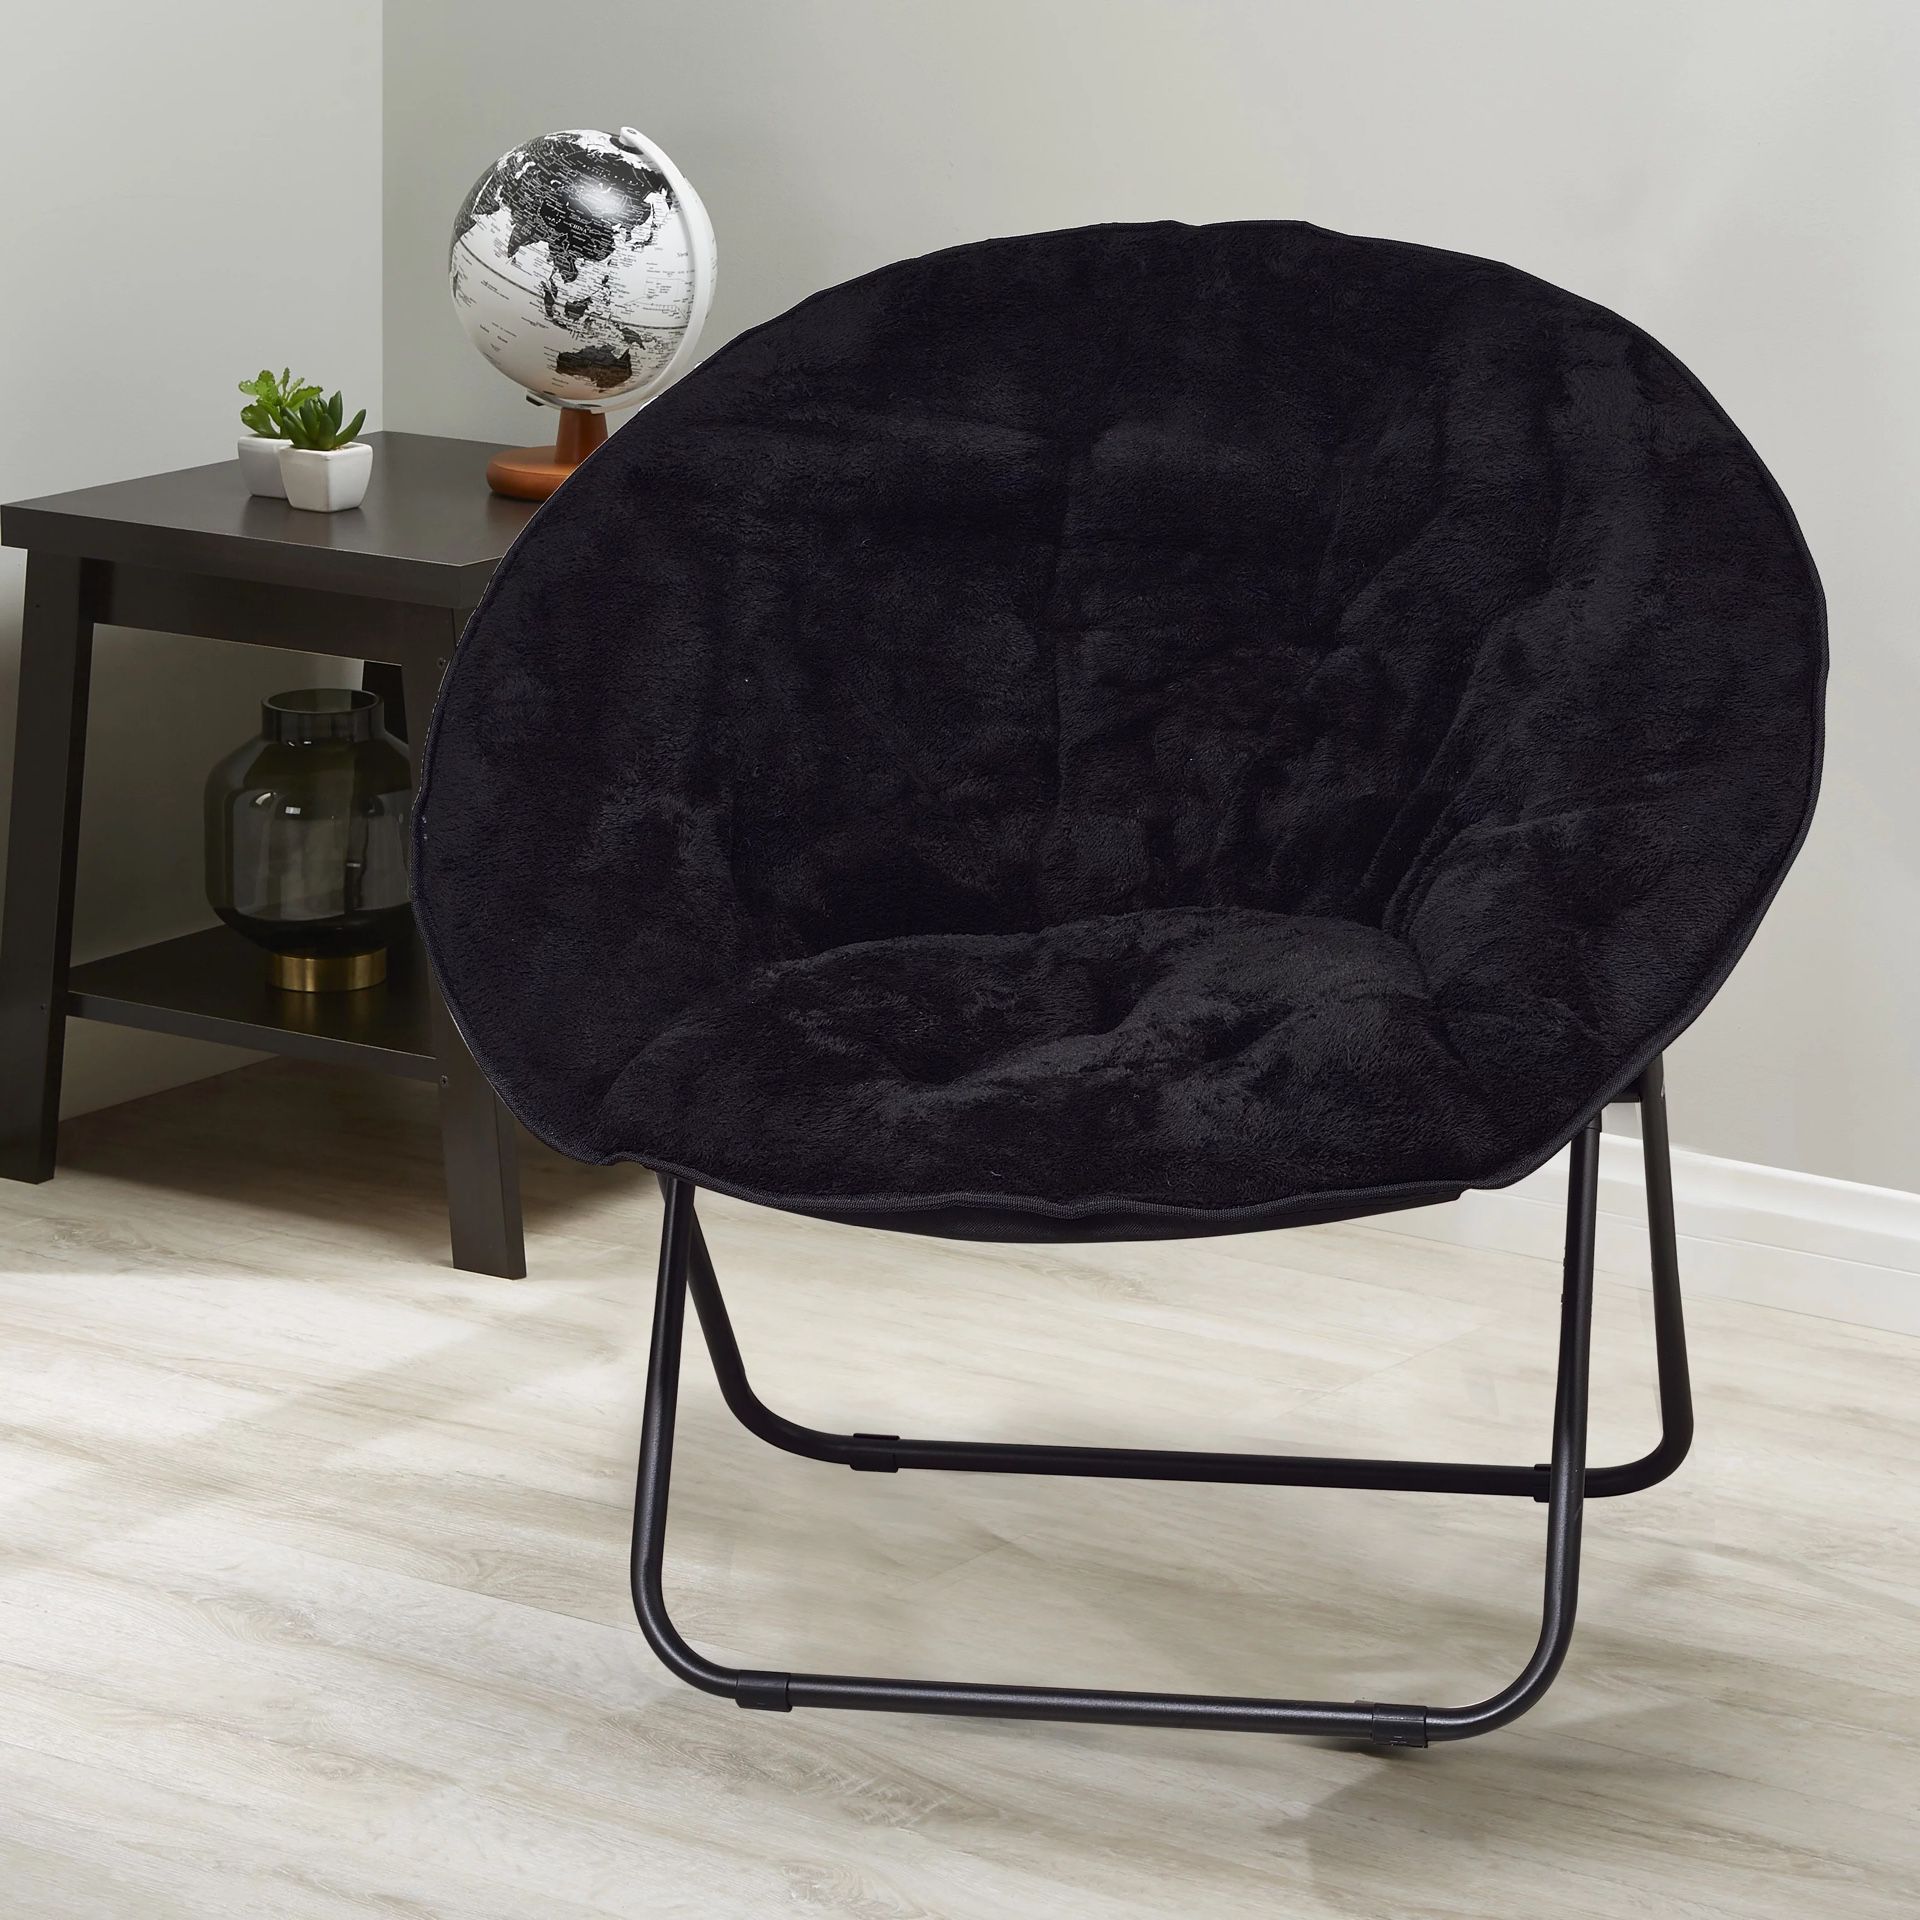 Mainstays Plush Saucer Chair, Black Black - 30in W*26.4in D*28in H